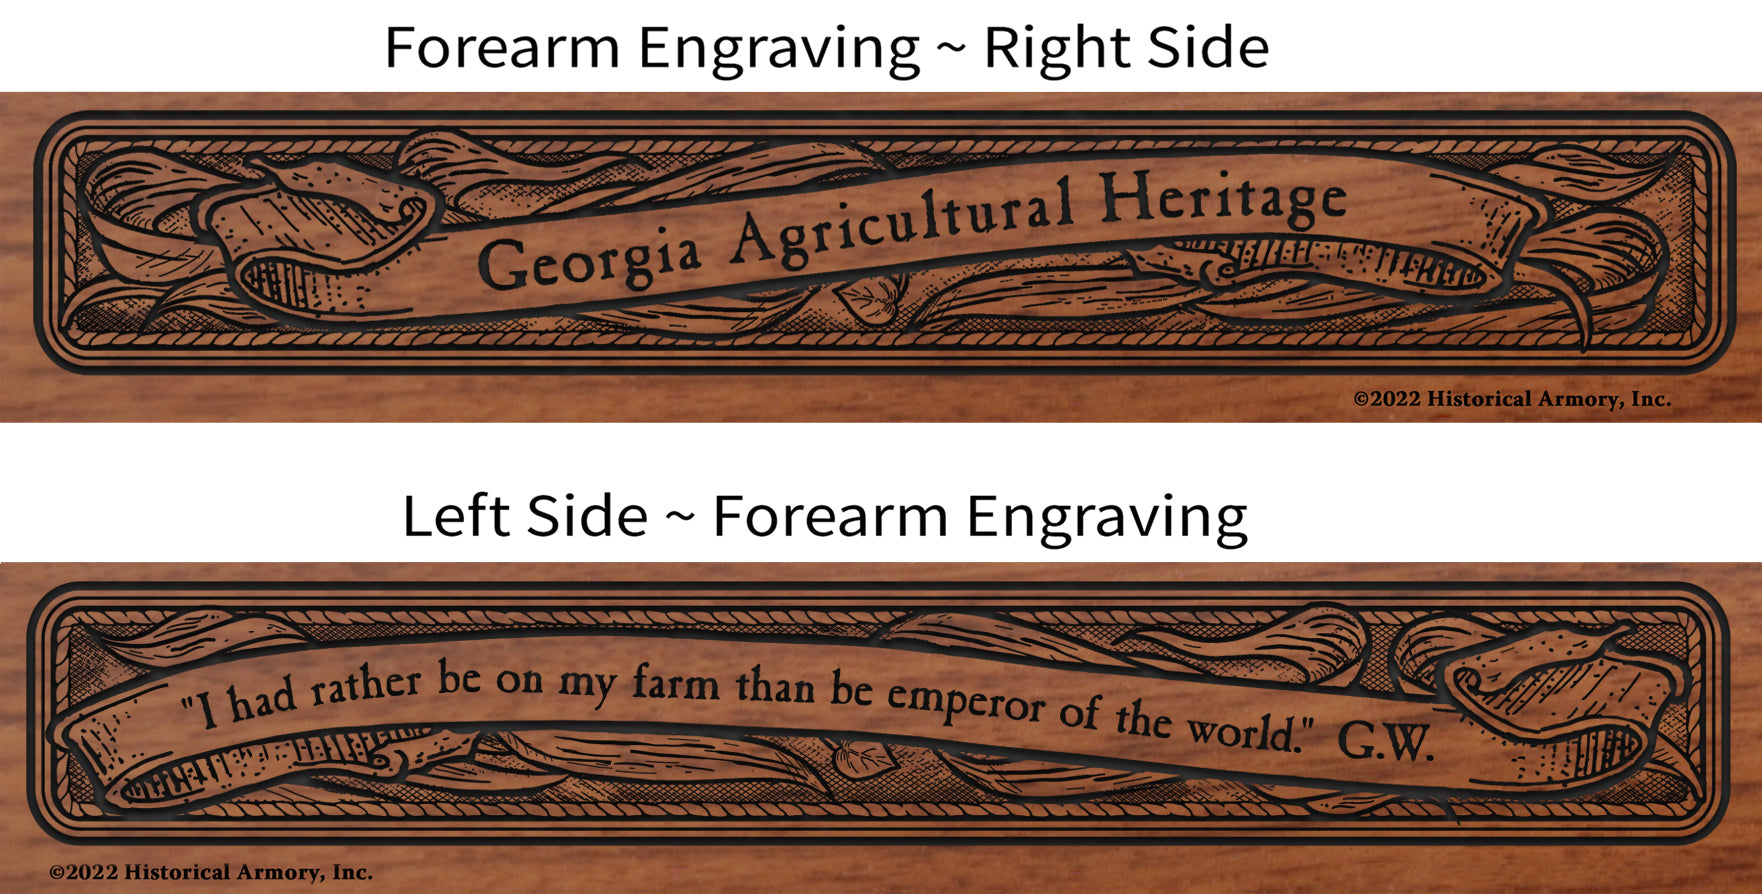 Georgia Agricultural Heritage Engraved Rifle Forearm